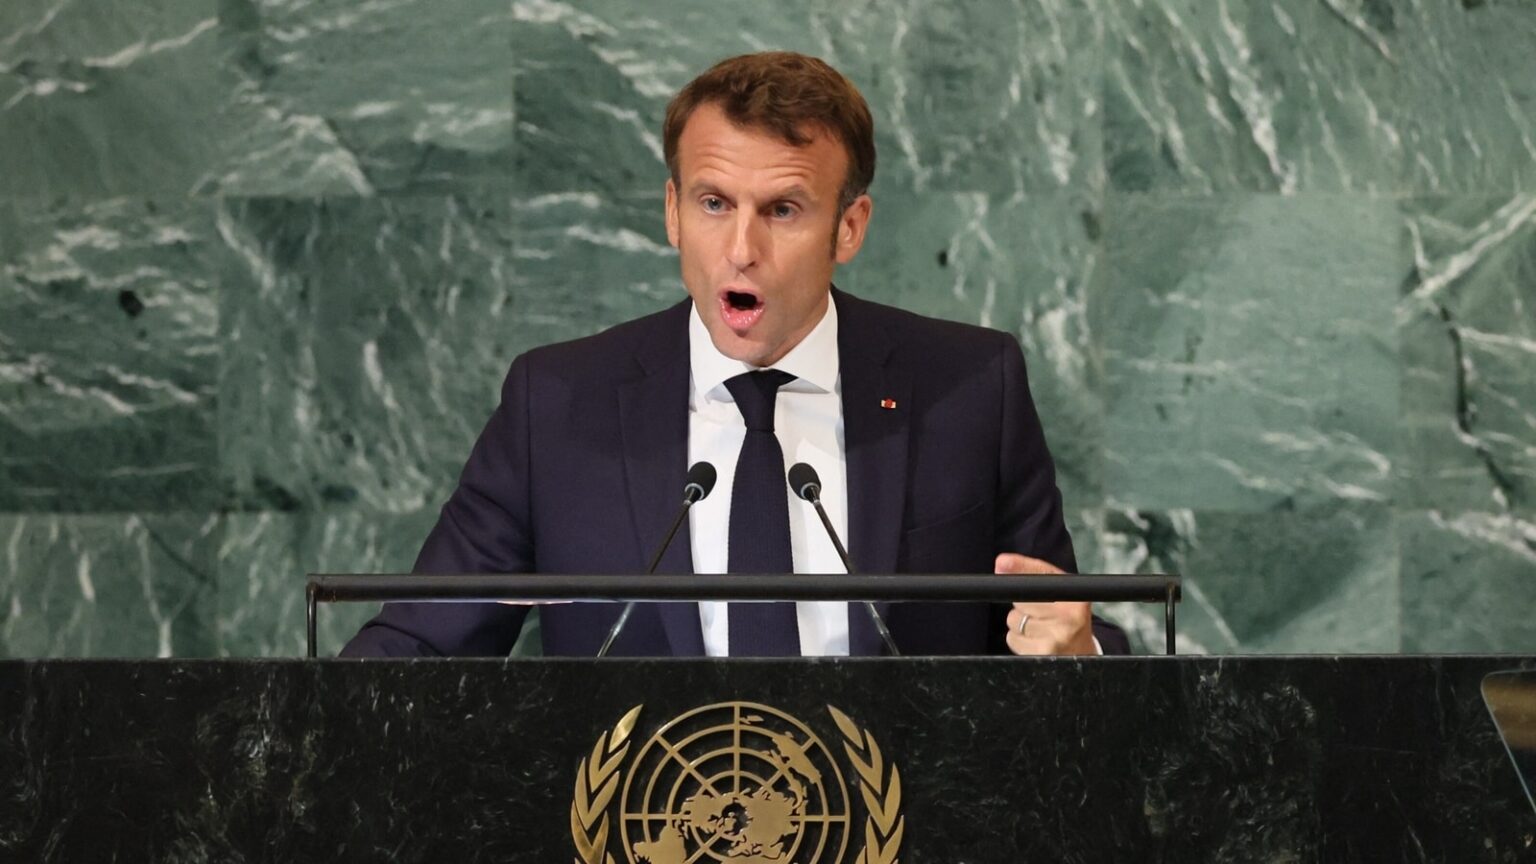 French President supported PM Modi’s words at UNGA